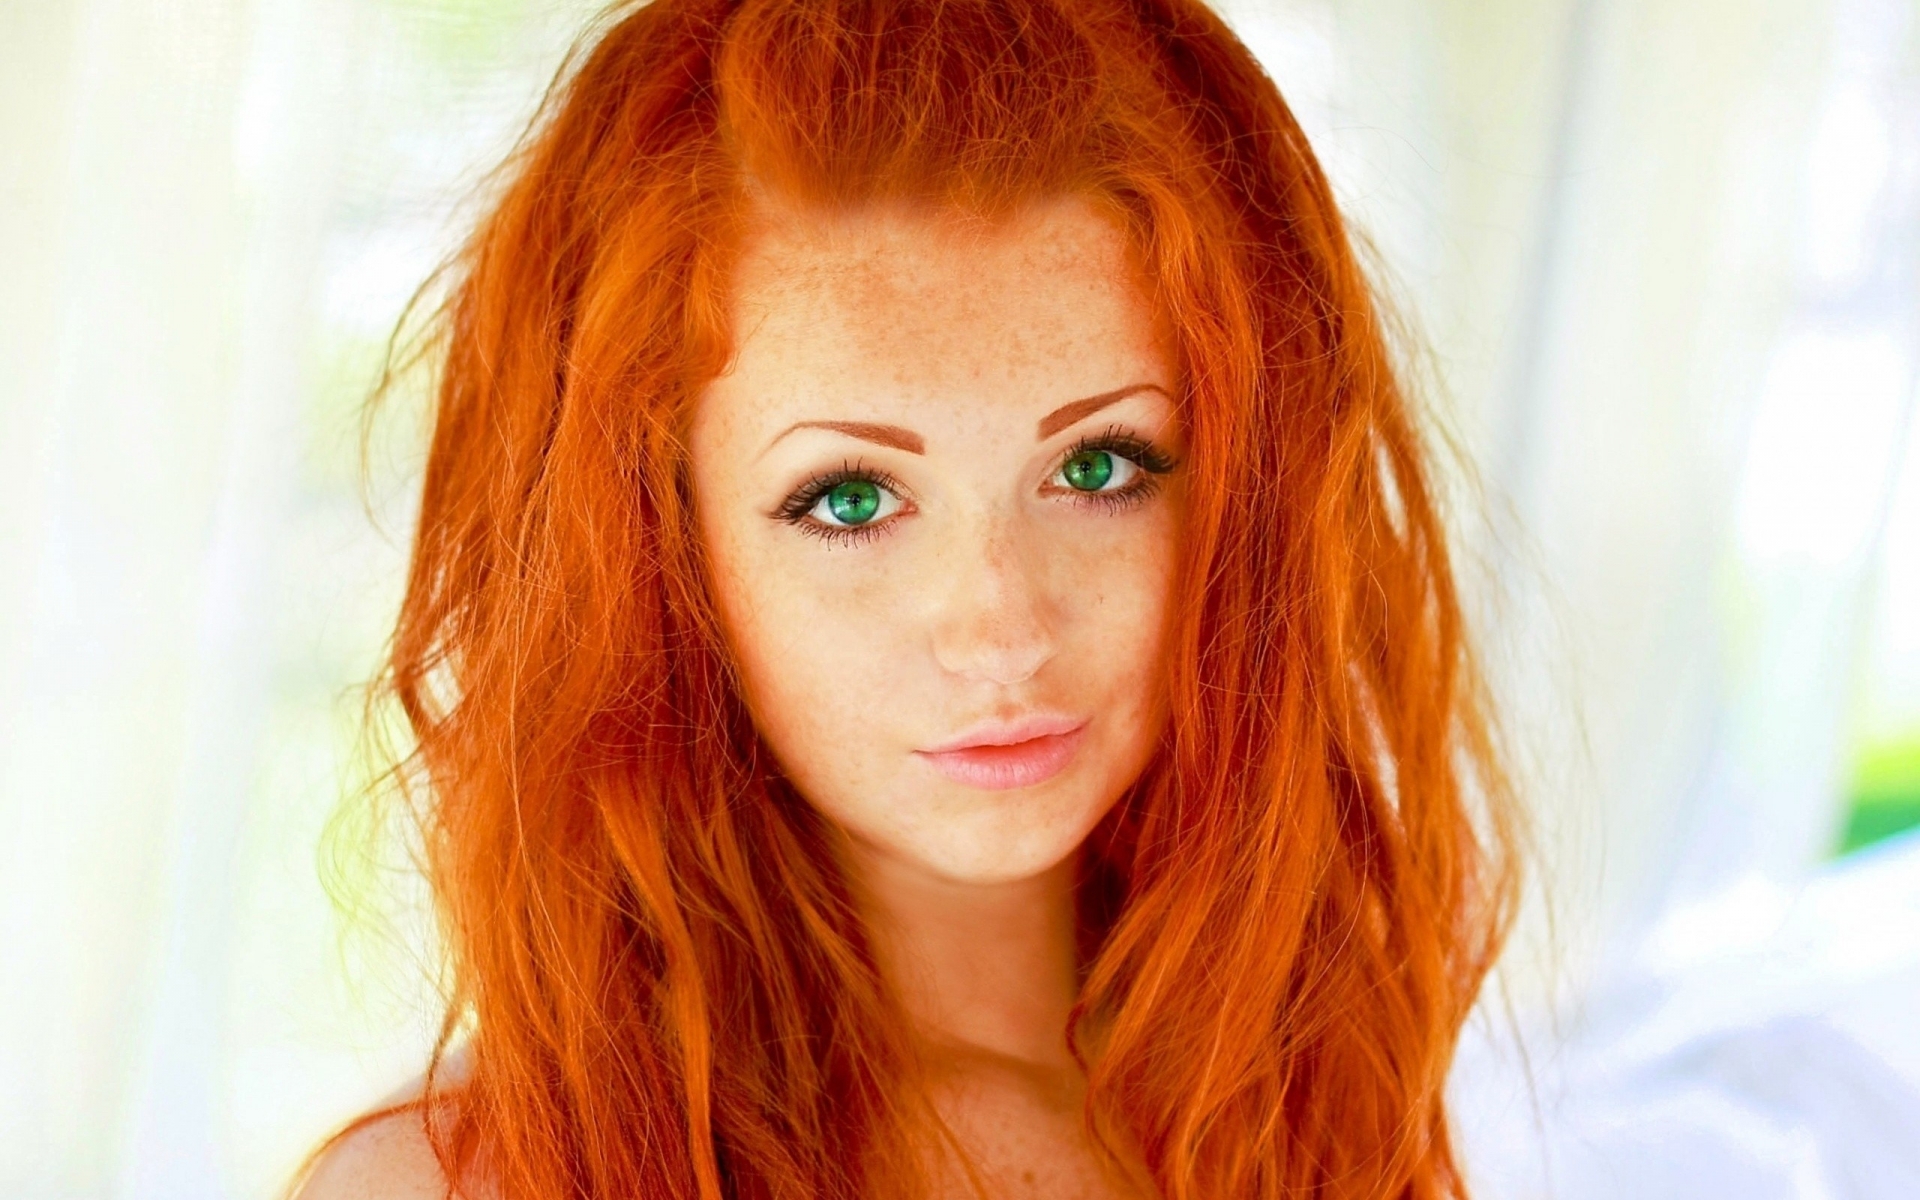 redhead, Face, Eyes, Lops, Bright, Red, Orange, Porn, Adult, Actress, Model, Portrait, Wo...